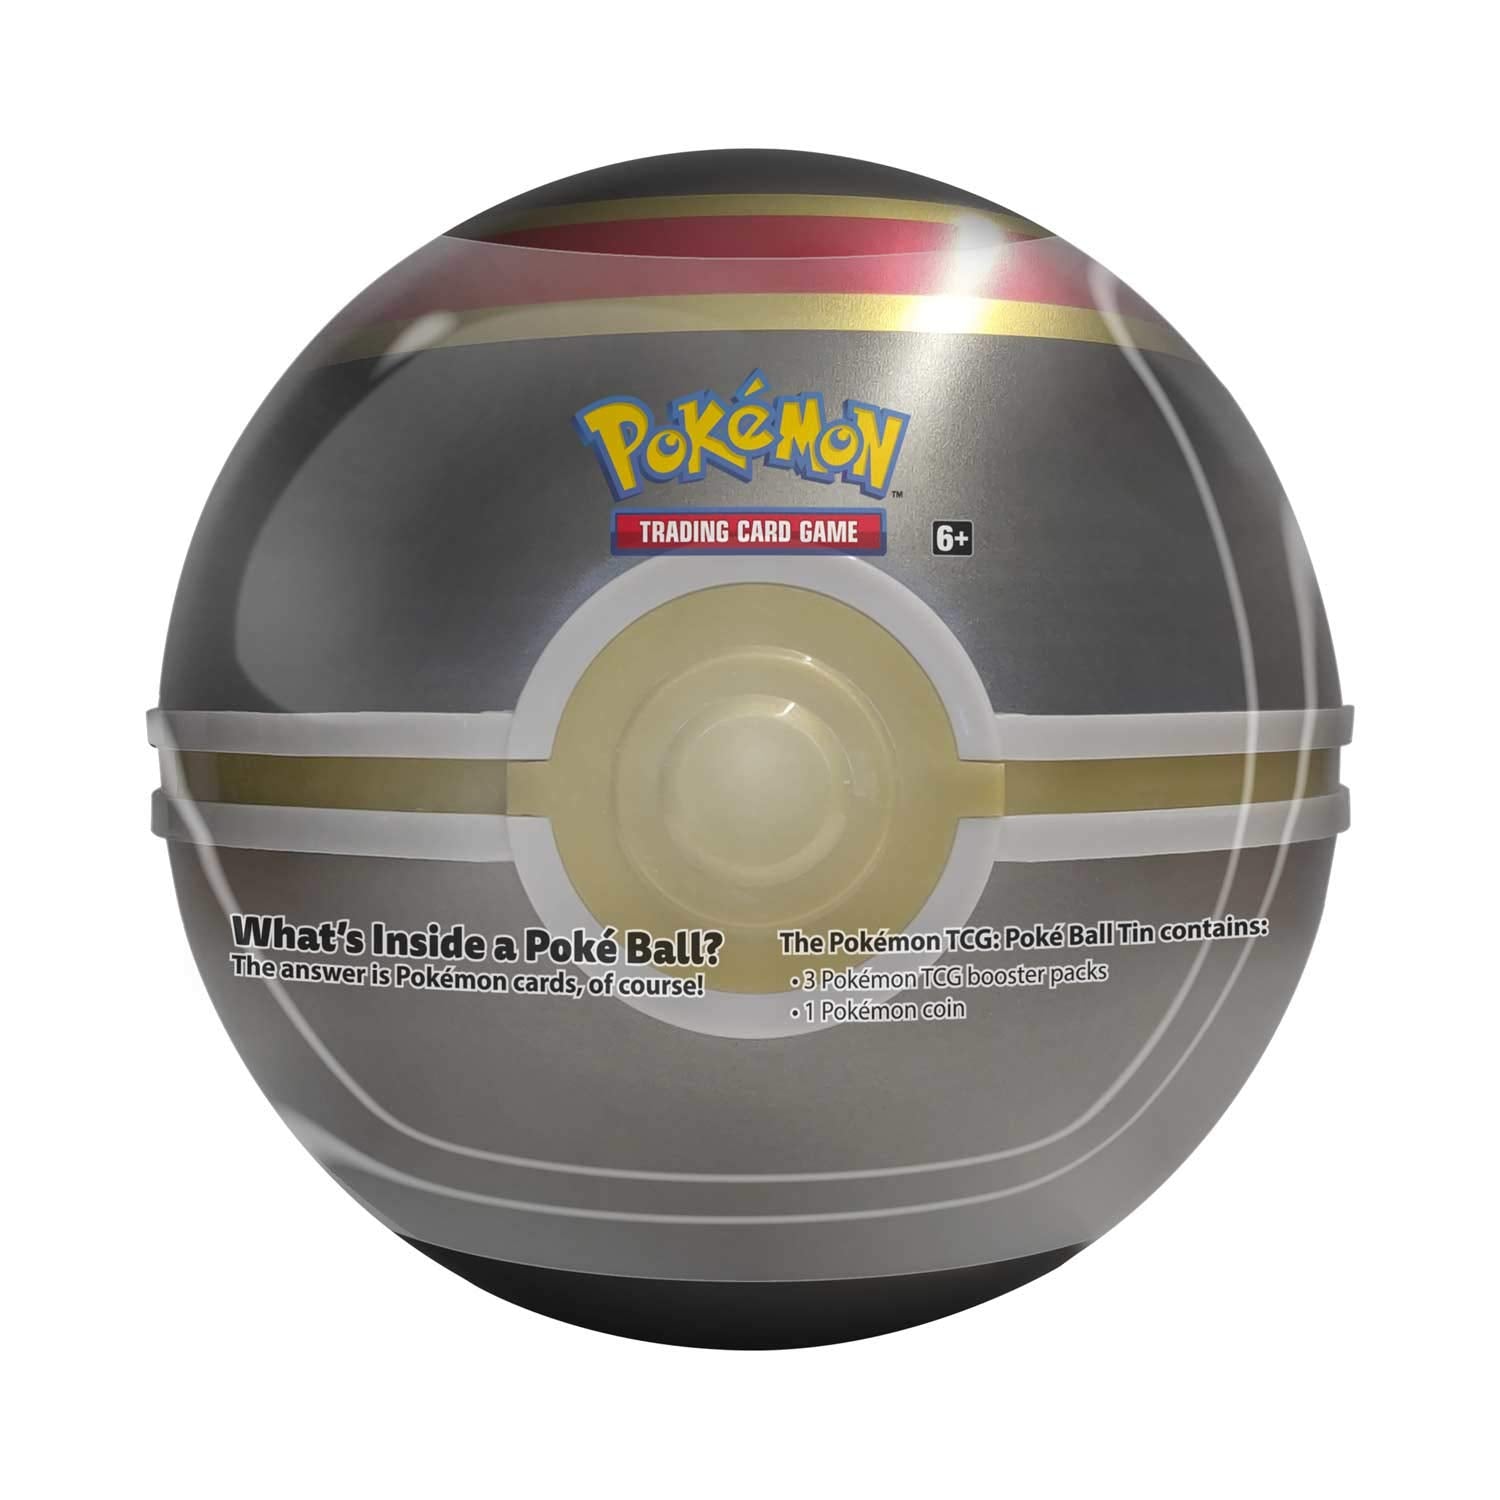 Pokemon TCG: Poke Ball Luxury Ball Tin - 4 Booster Pack with 1 Coin